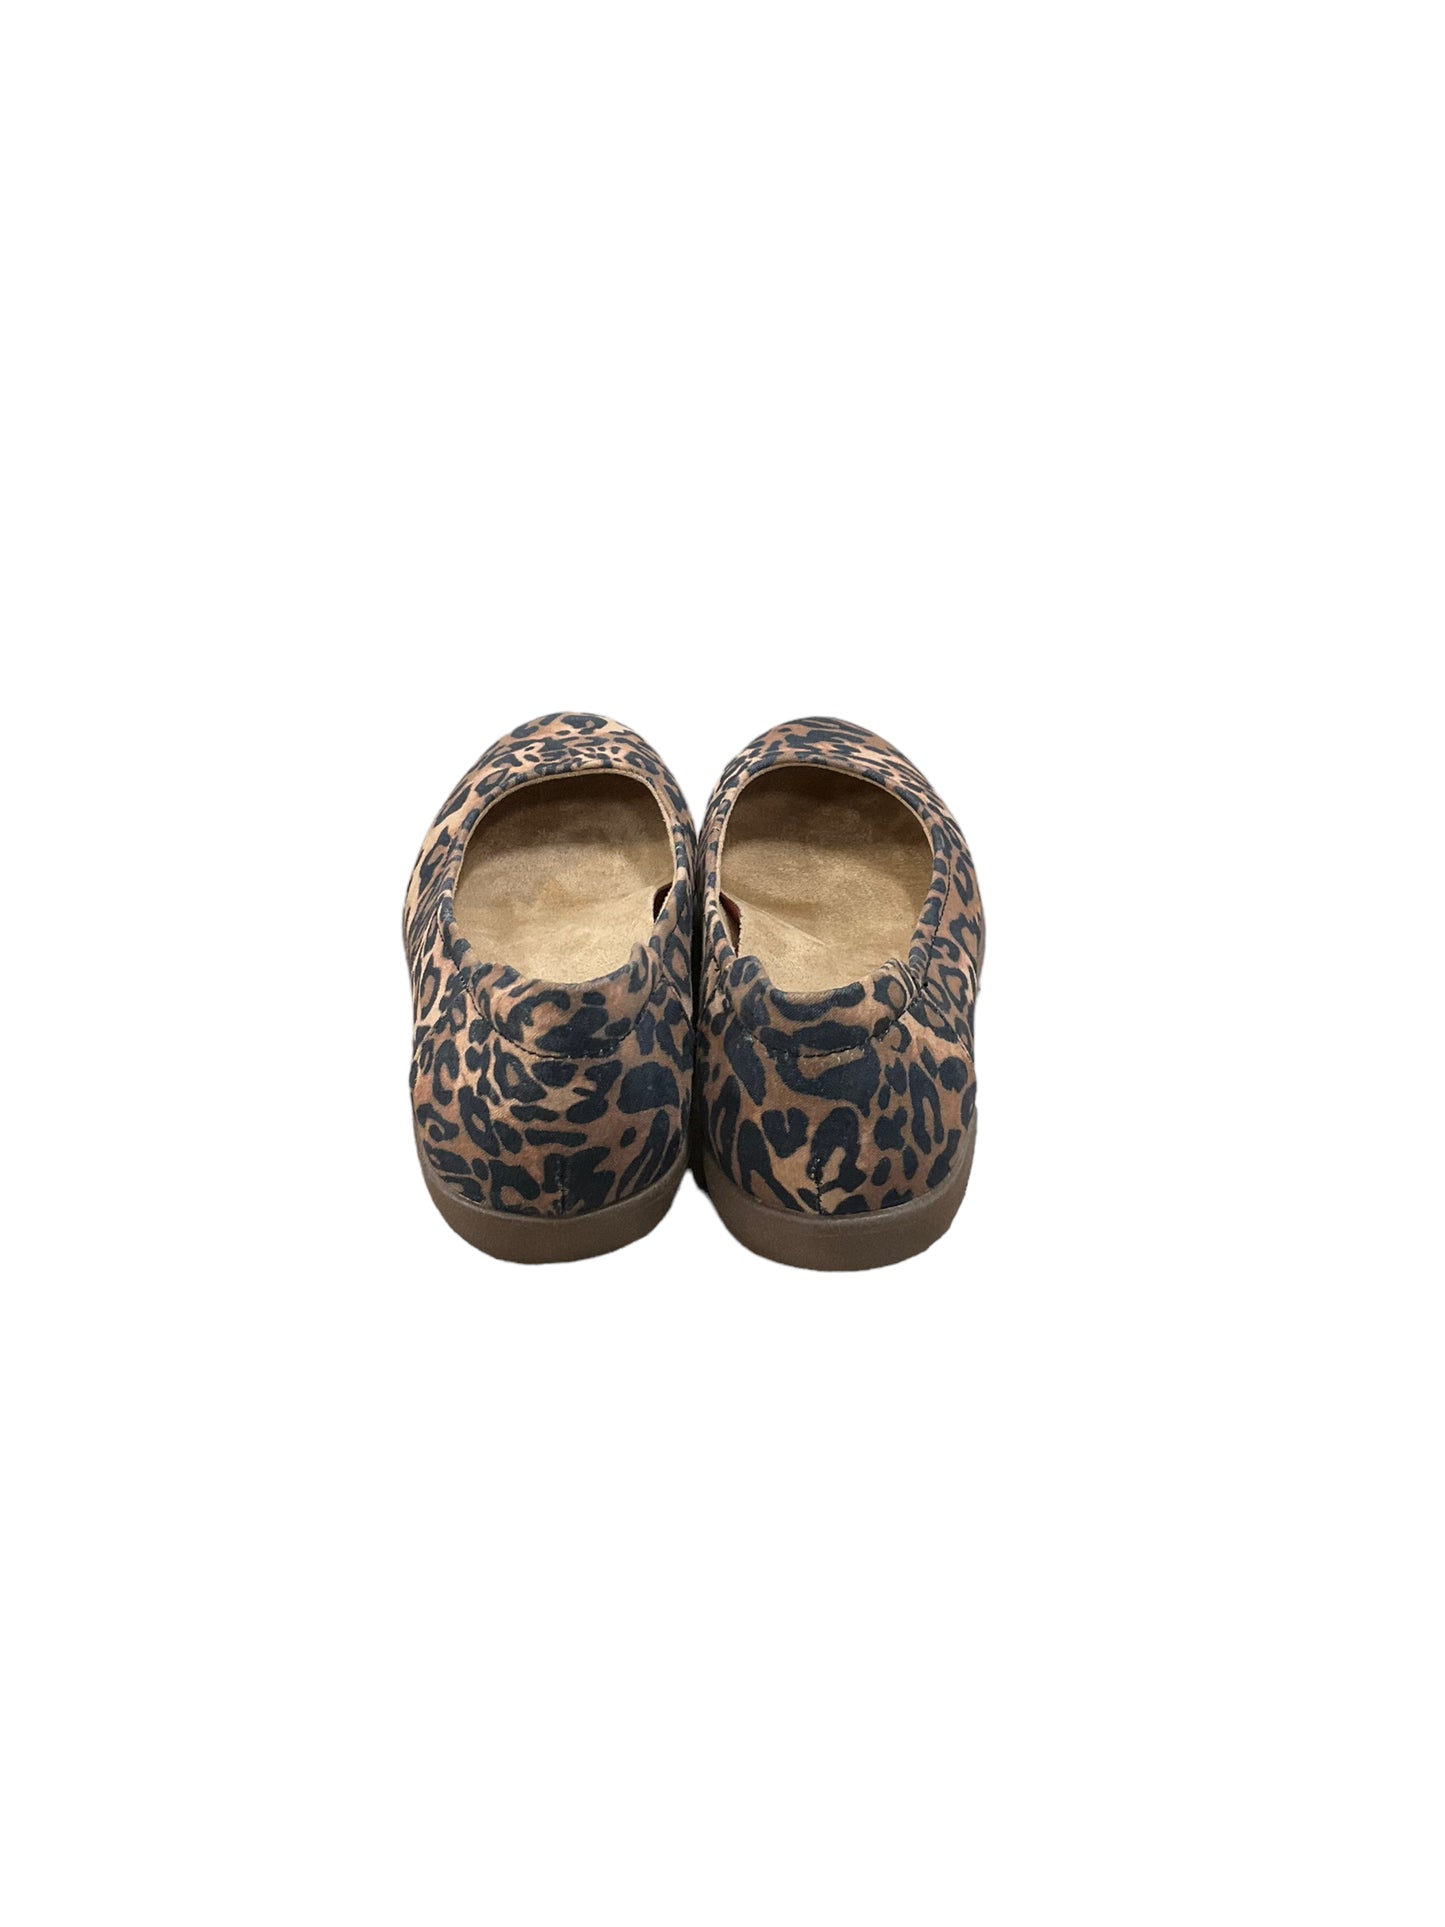 Shoes Flats Other By Naturalizer  Size: 6.5